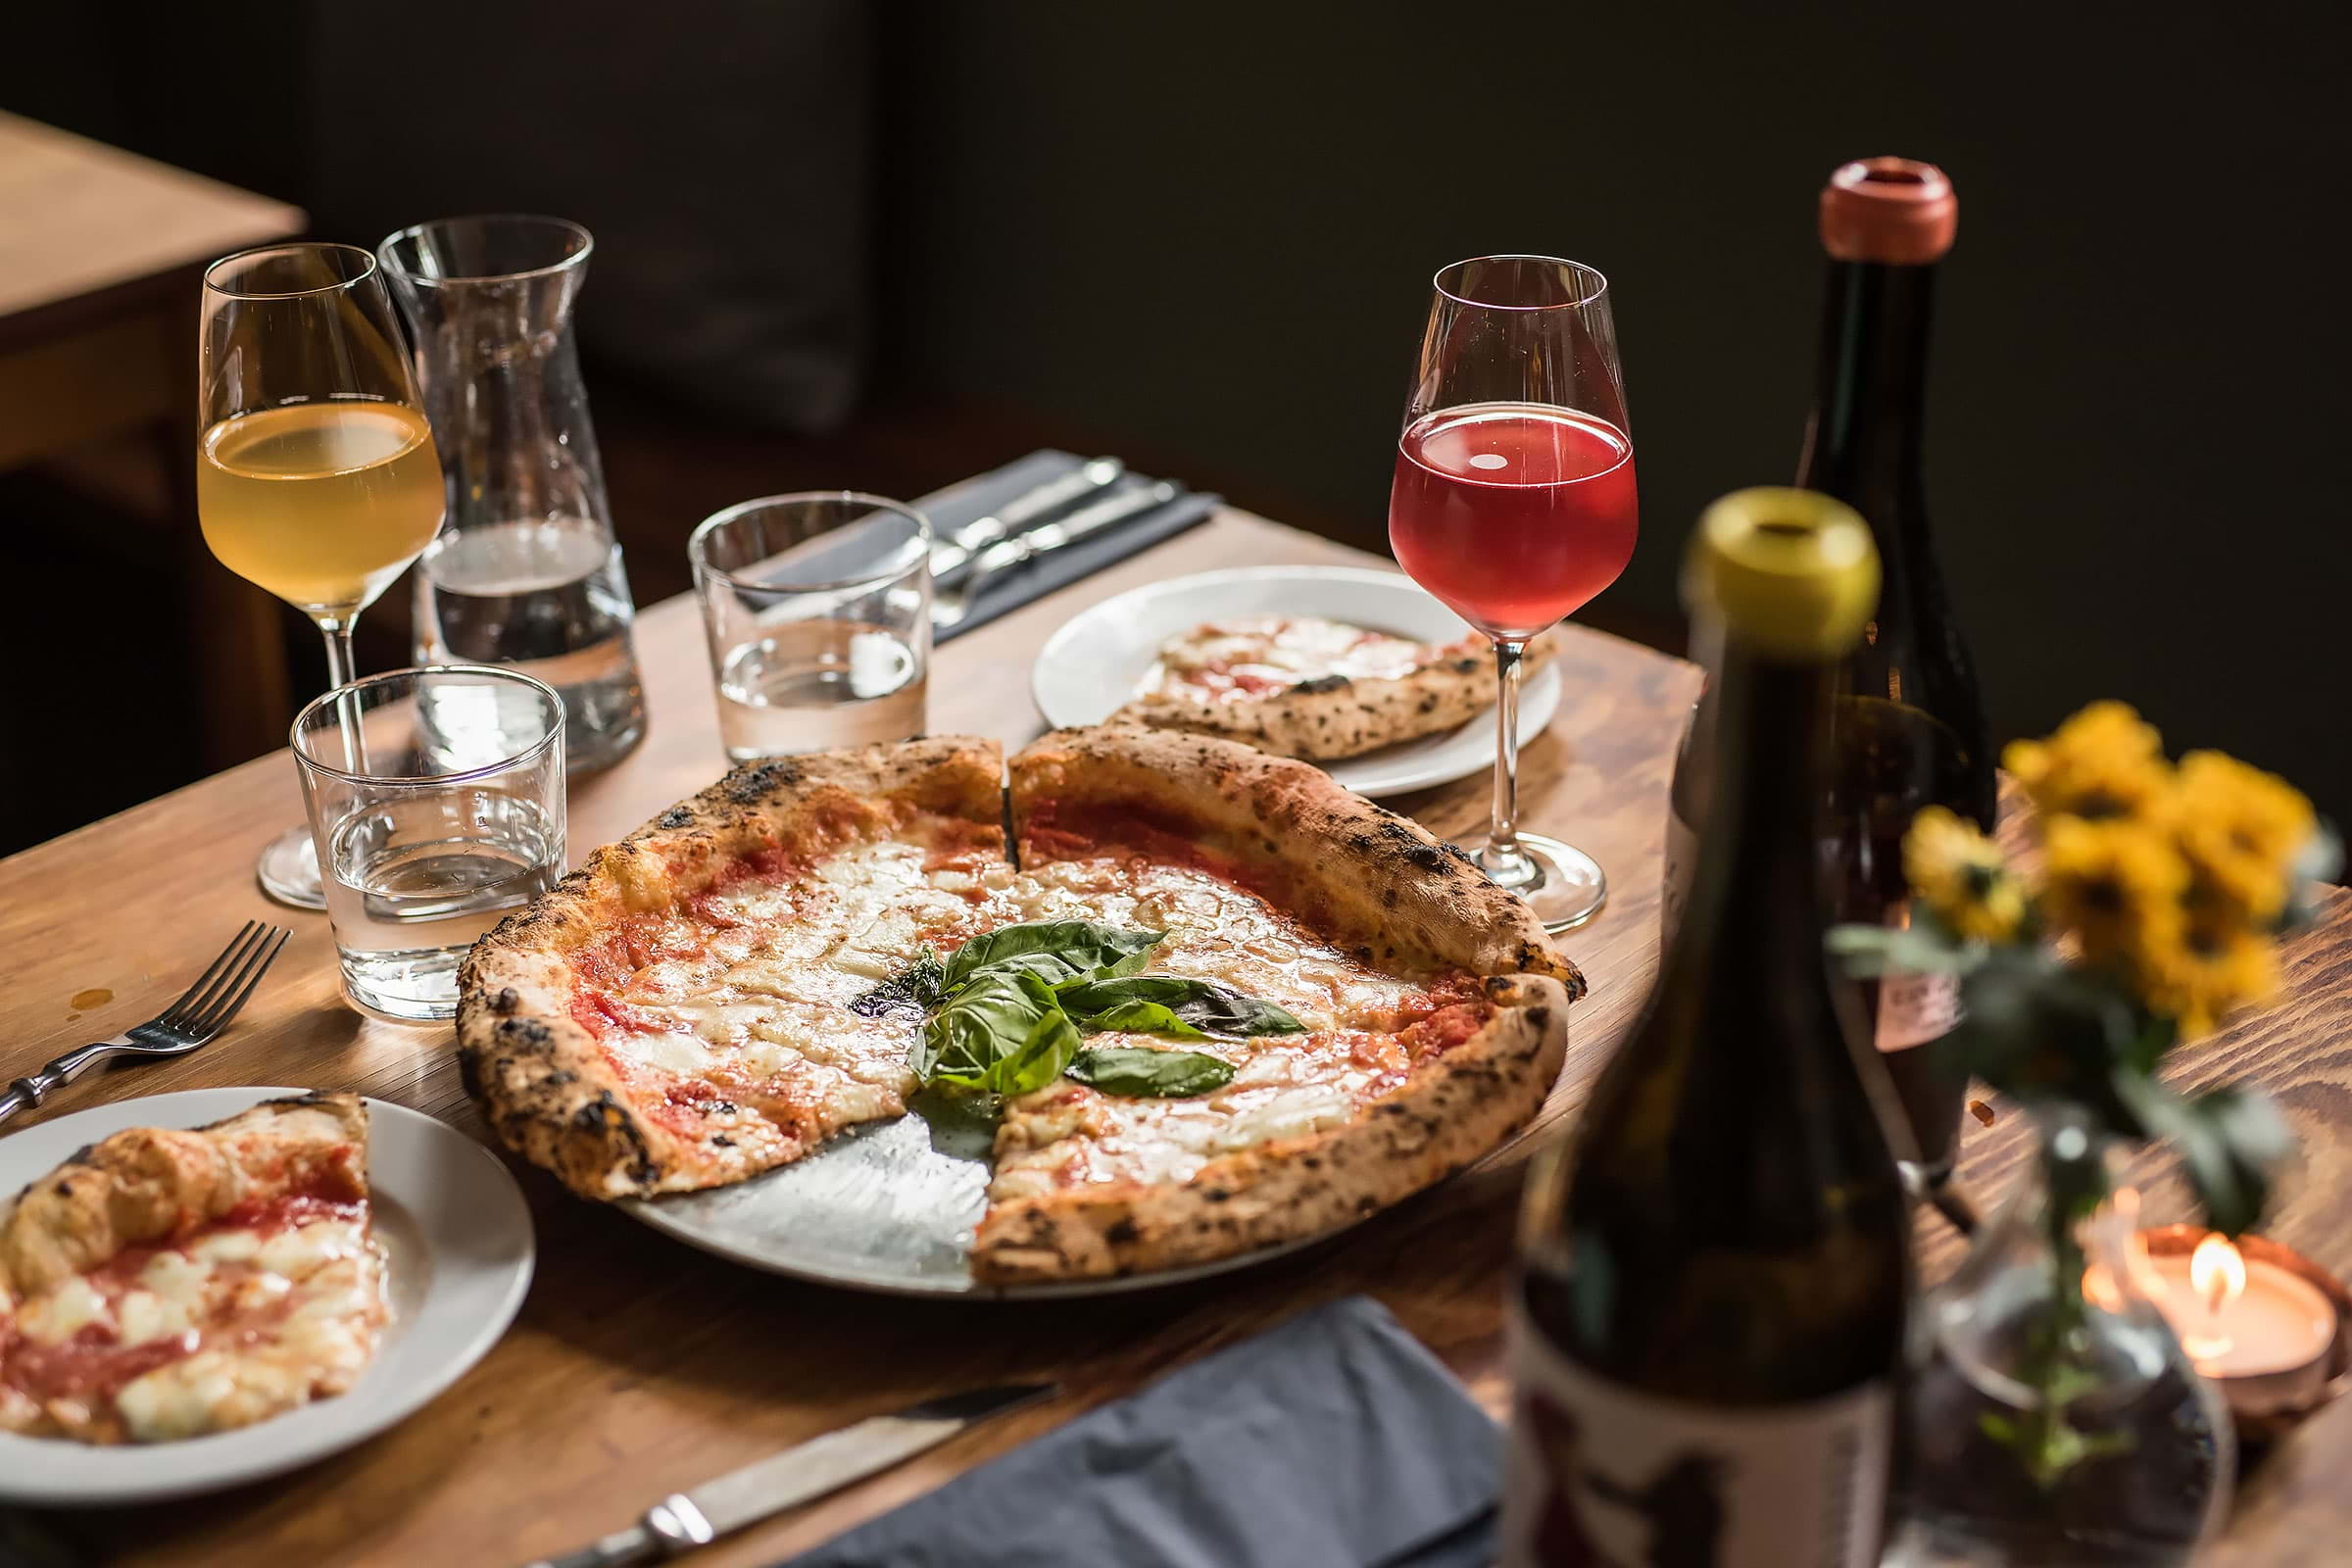 The guide to Gothenburg's best pizza